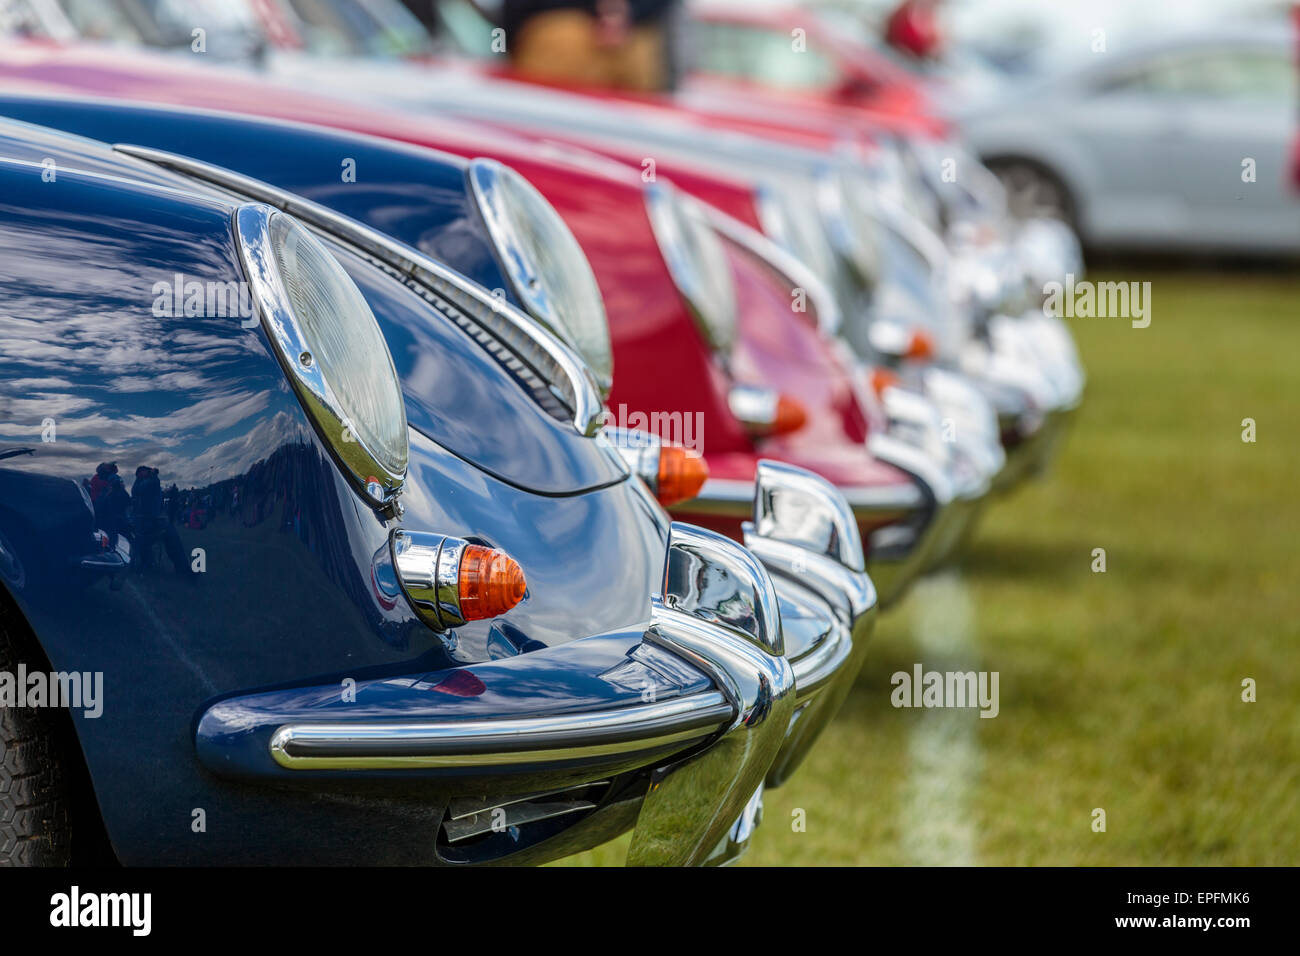 A landscape image of the headlamps of a collection of Porsche 356 classic sports cars, Bedfordshire England UK Stock Photo